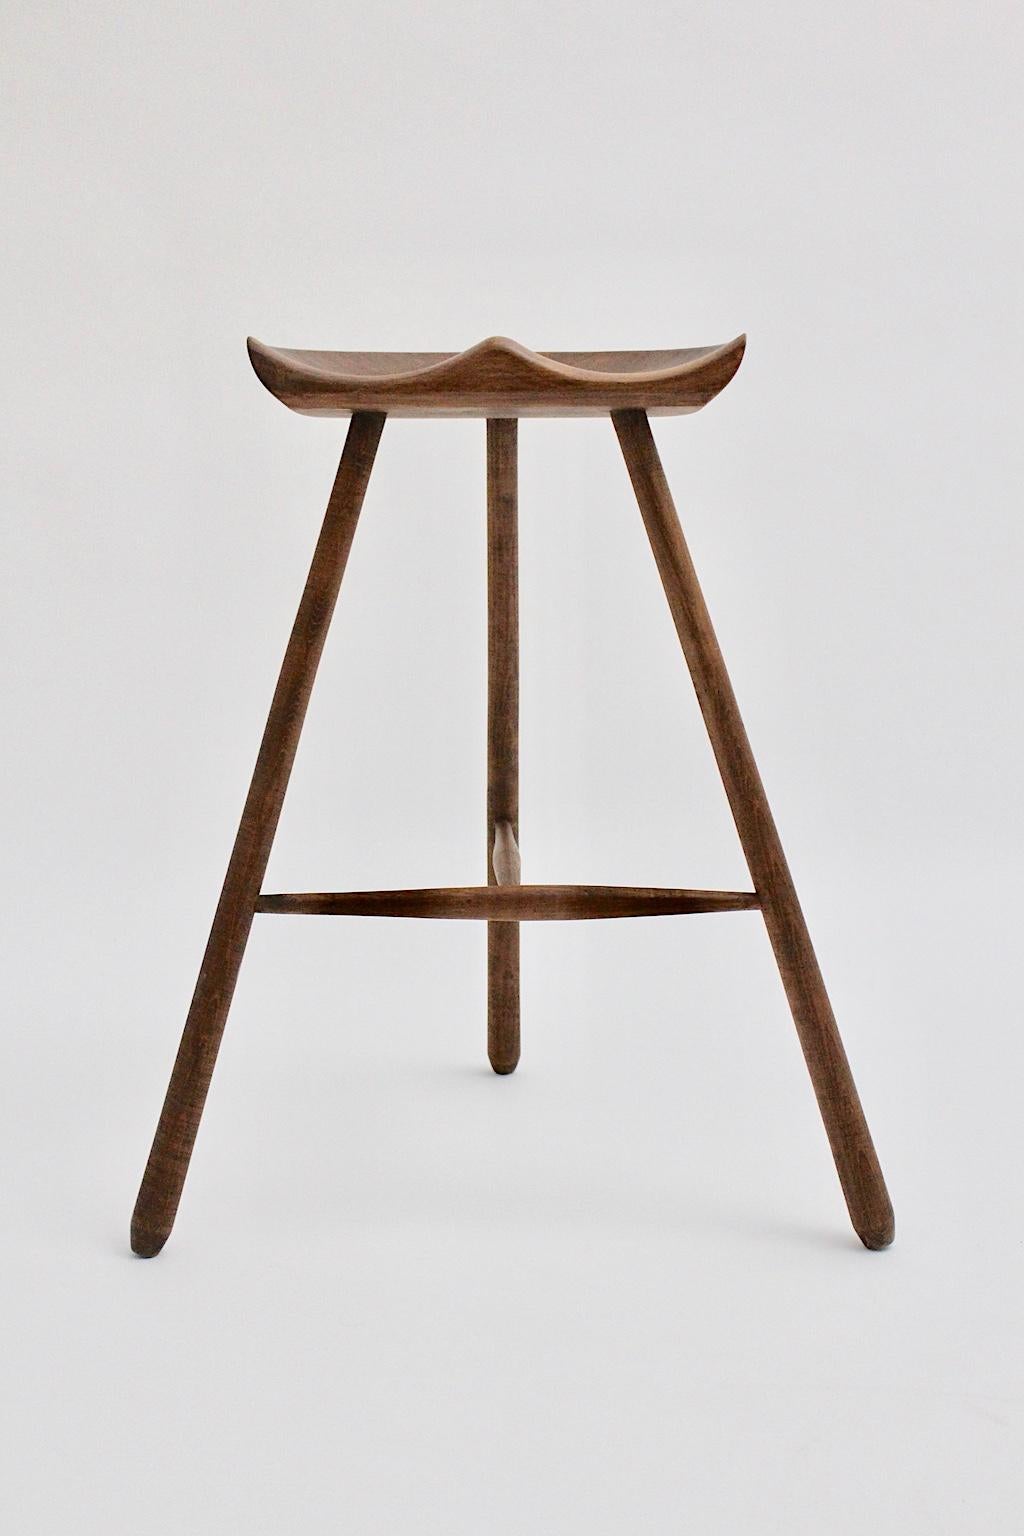 Scandinavian Modern three legged teak stool, which was made out of solid teak and designed by Arne Hovmand-Olsen 1960s, made in Denmark. Three splayed feet, which are connected, and a hand carved seat complete the picture of a beautiful handcrafted